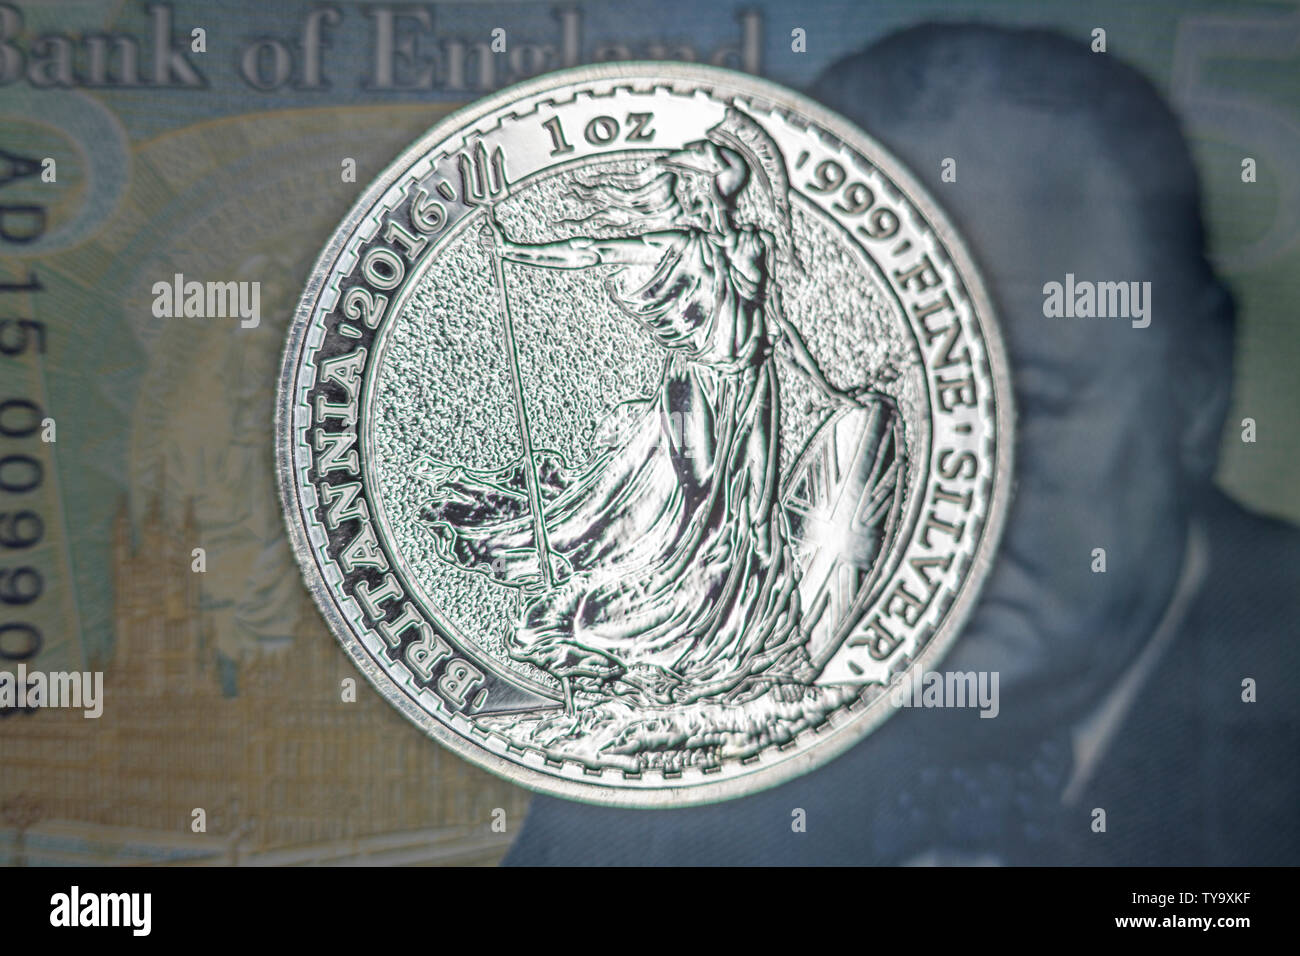 Silver coin on banknote Stock Photo